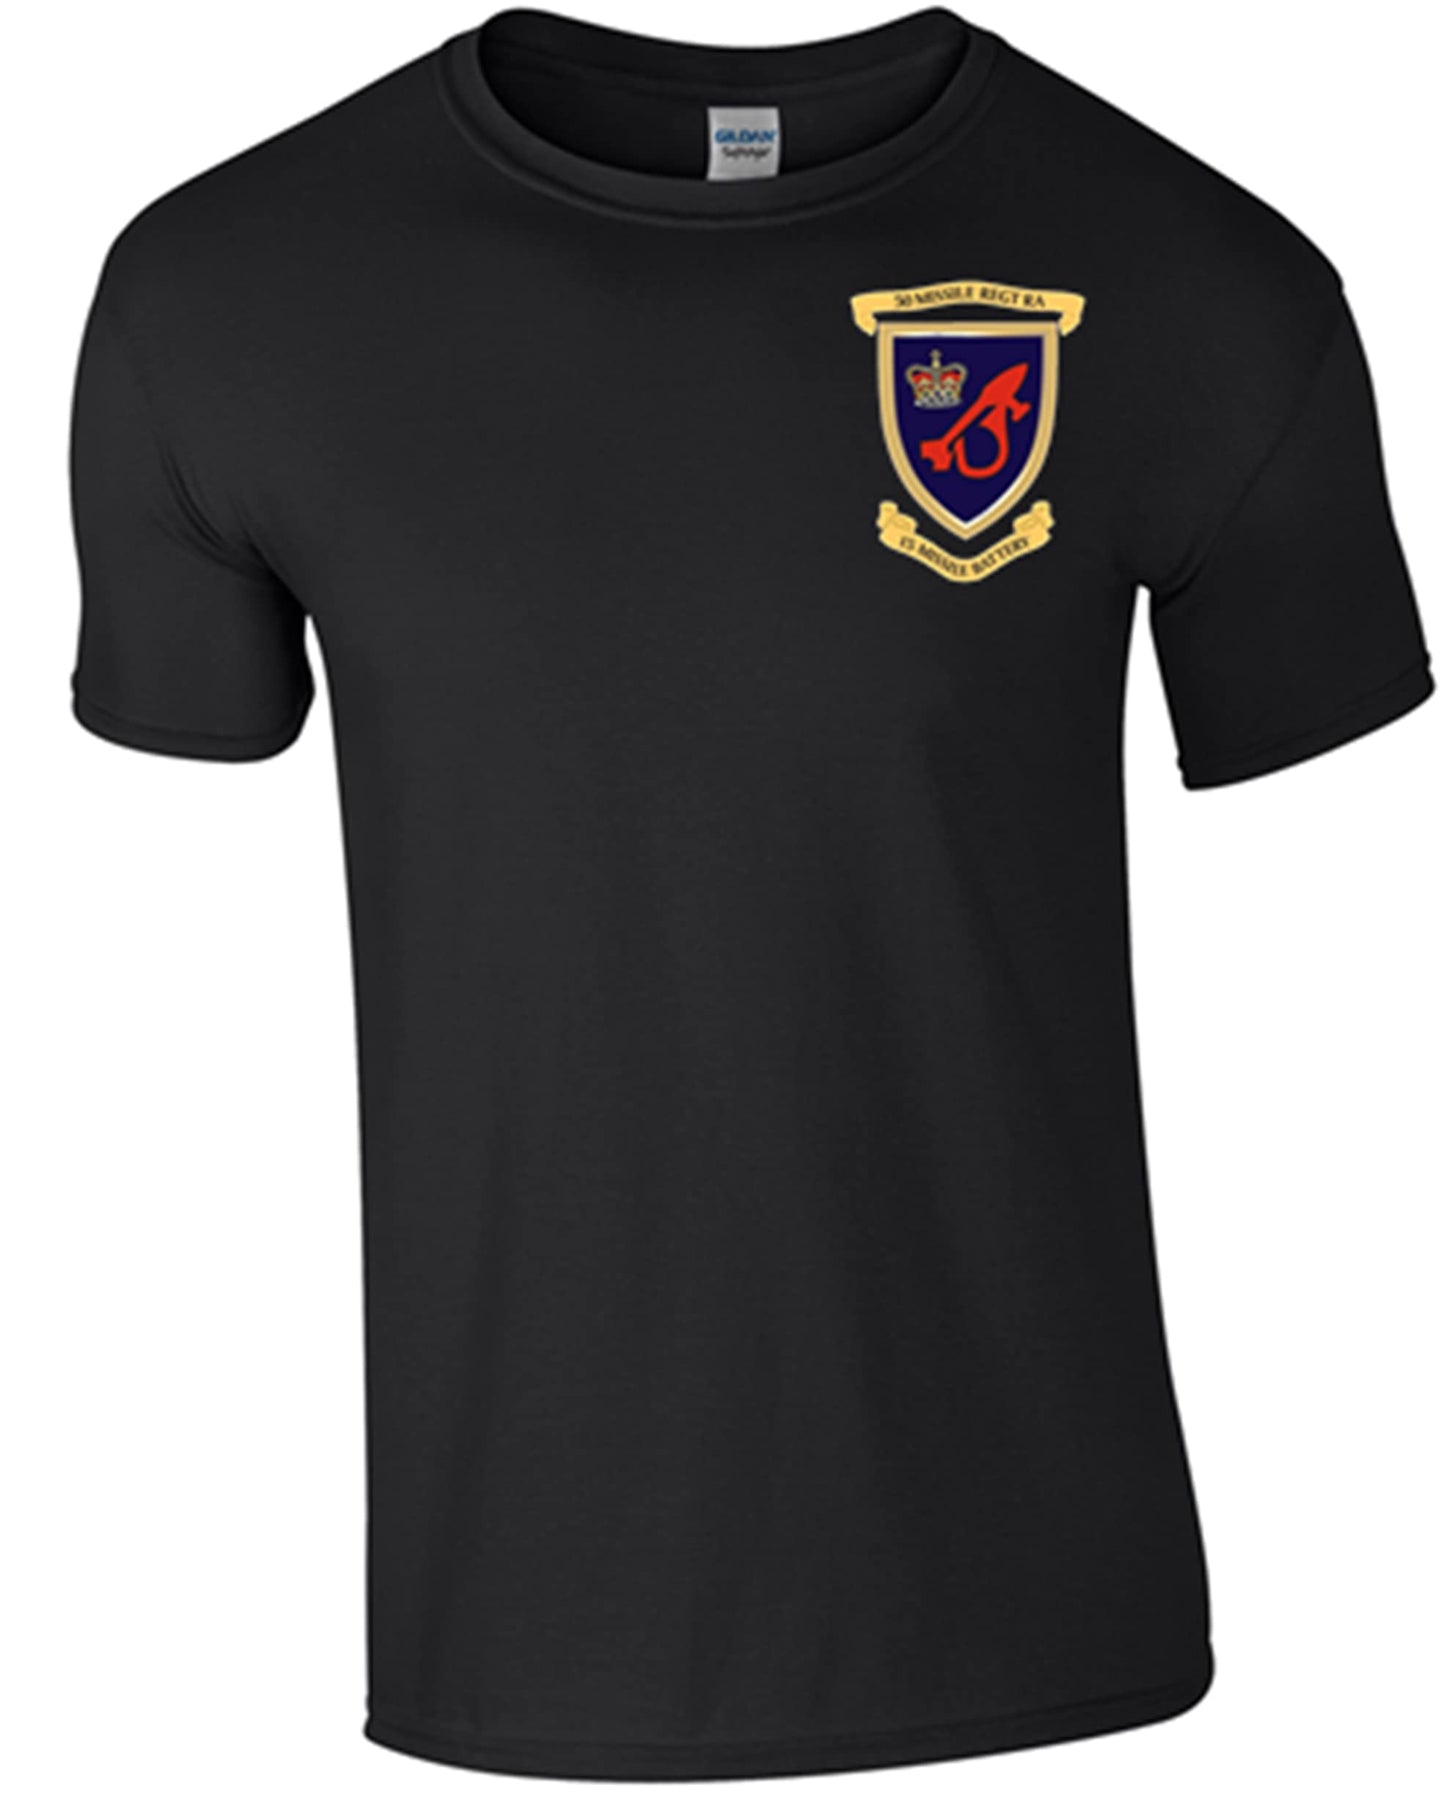 Army 1157 Kit Ministry of Defence T-Shirt 50 Missile Regiment with 15 Battery RA Logo on - Army 1157 kit Black / M Army 1157 Kit